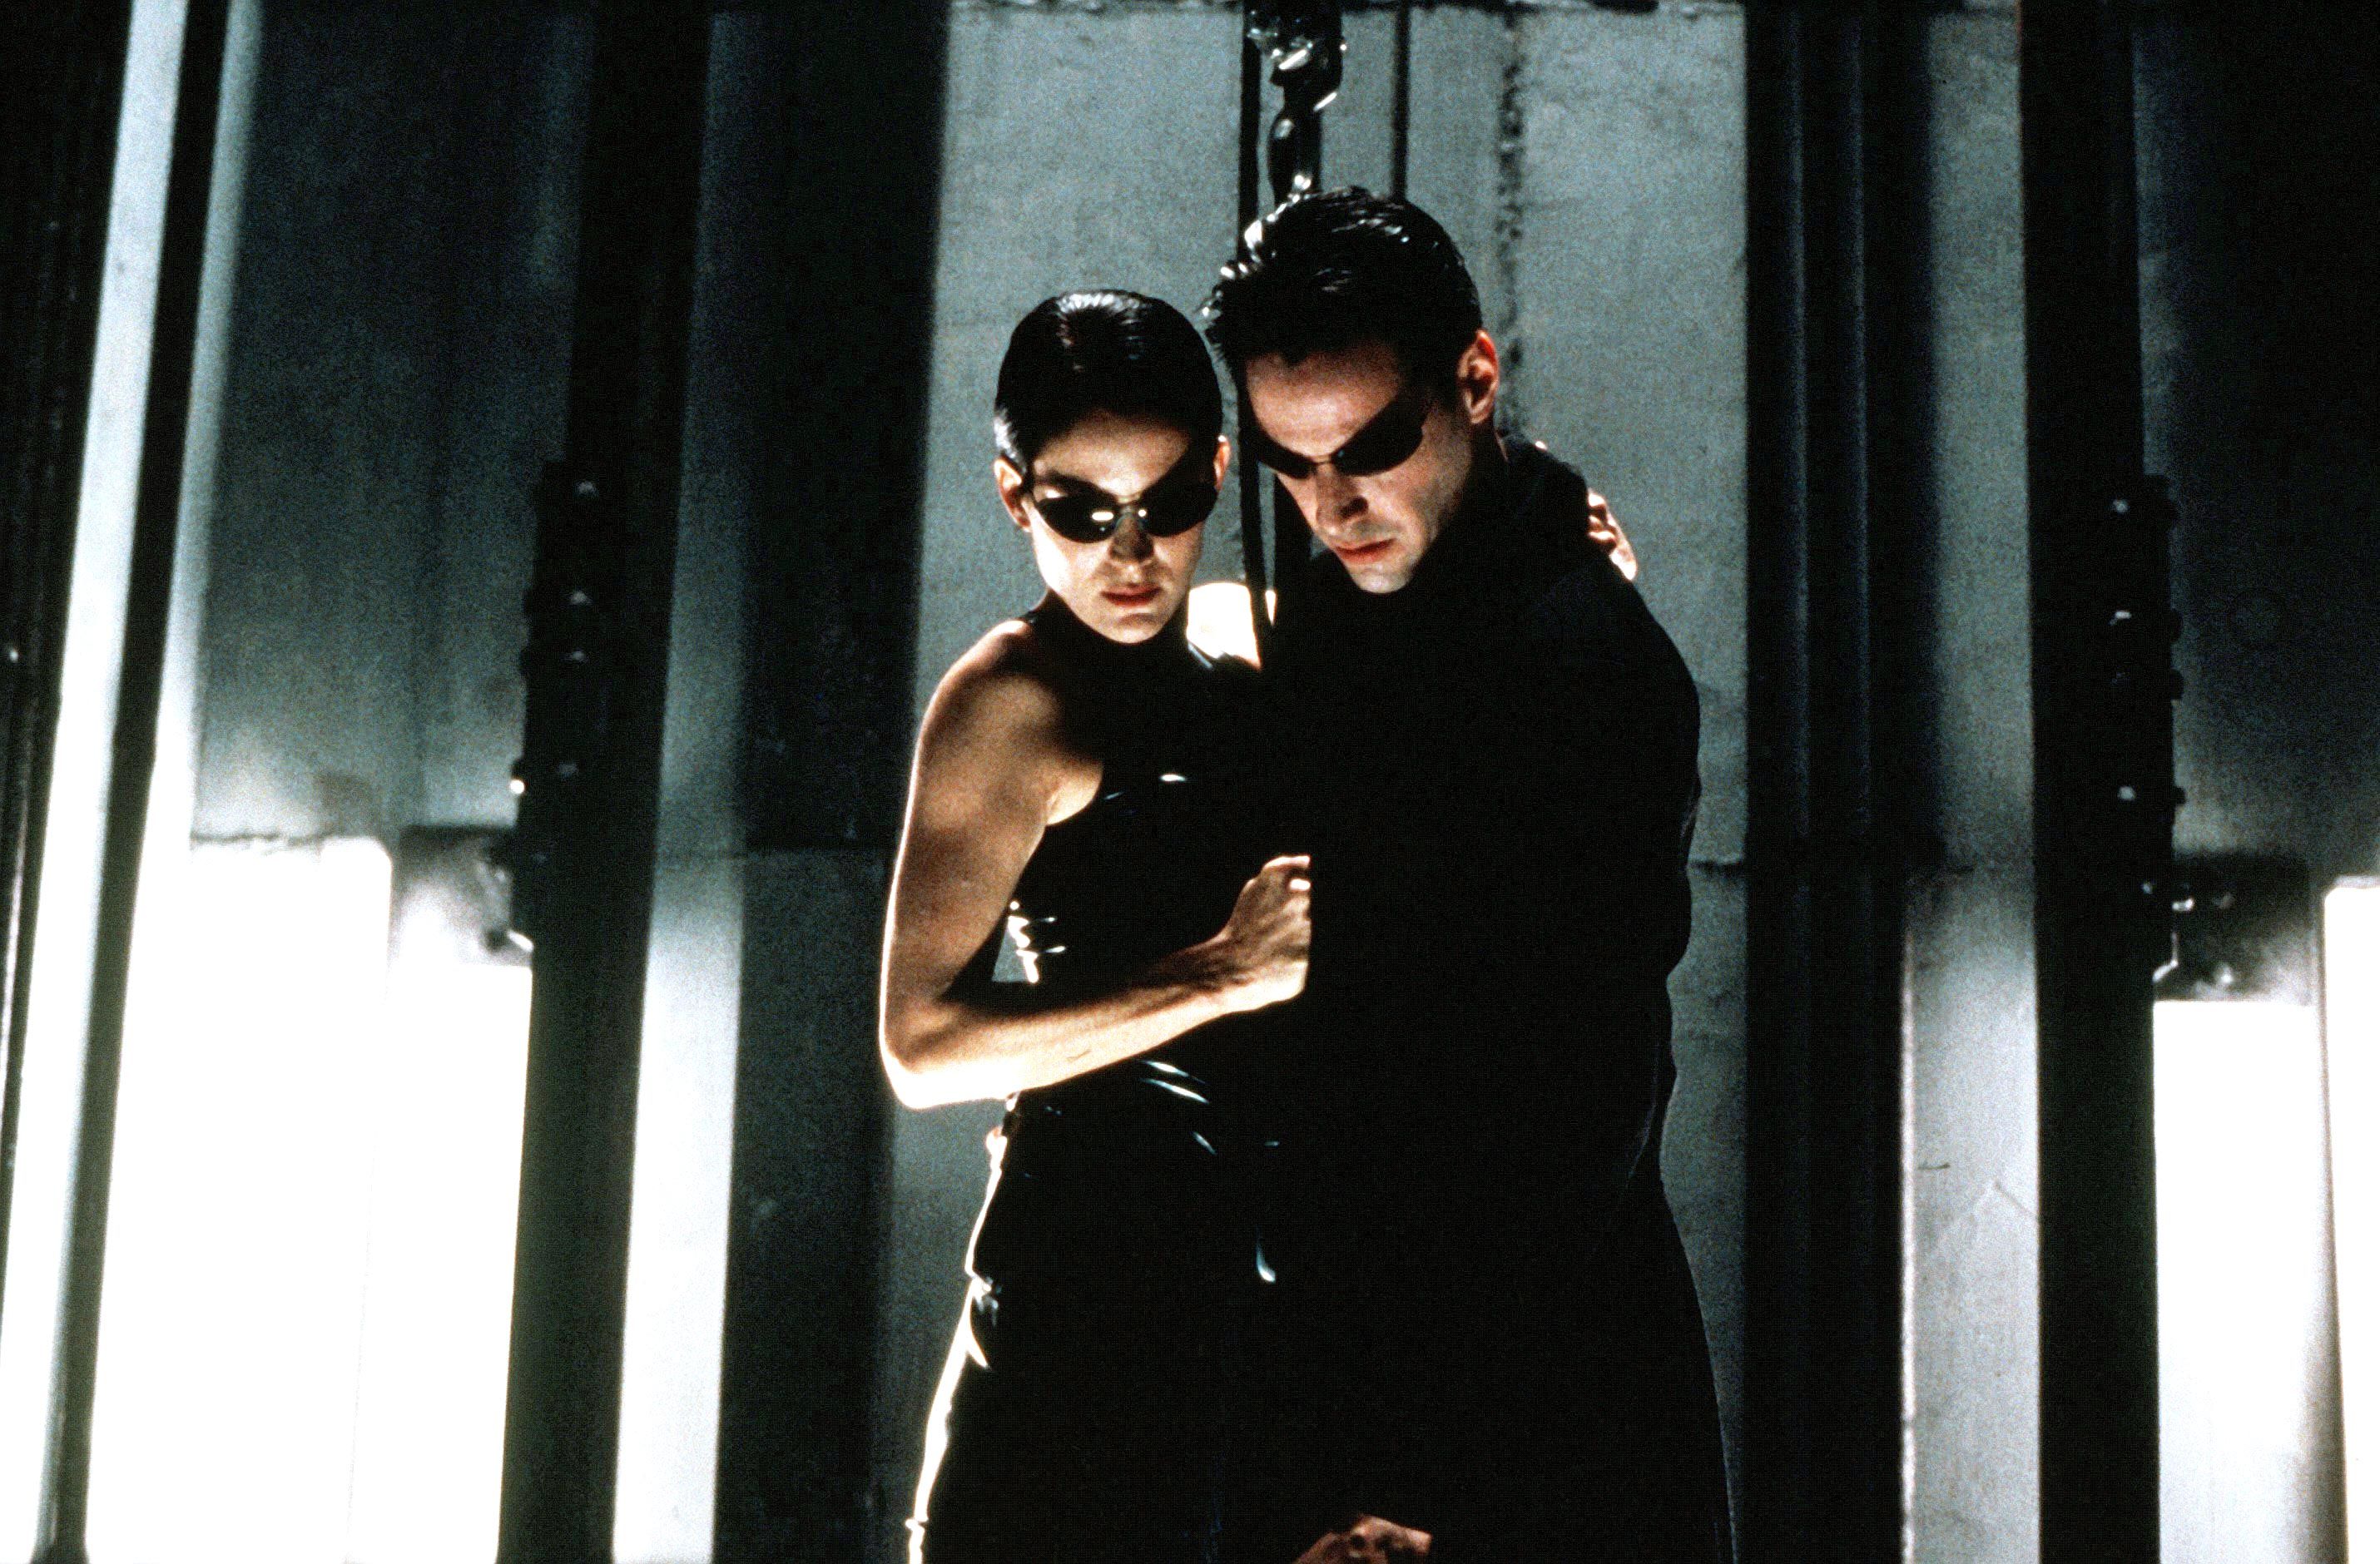 Matrix 4 filming photo reunites Keanu Reeves and Carrie-Anne Moss